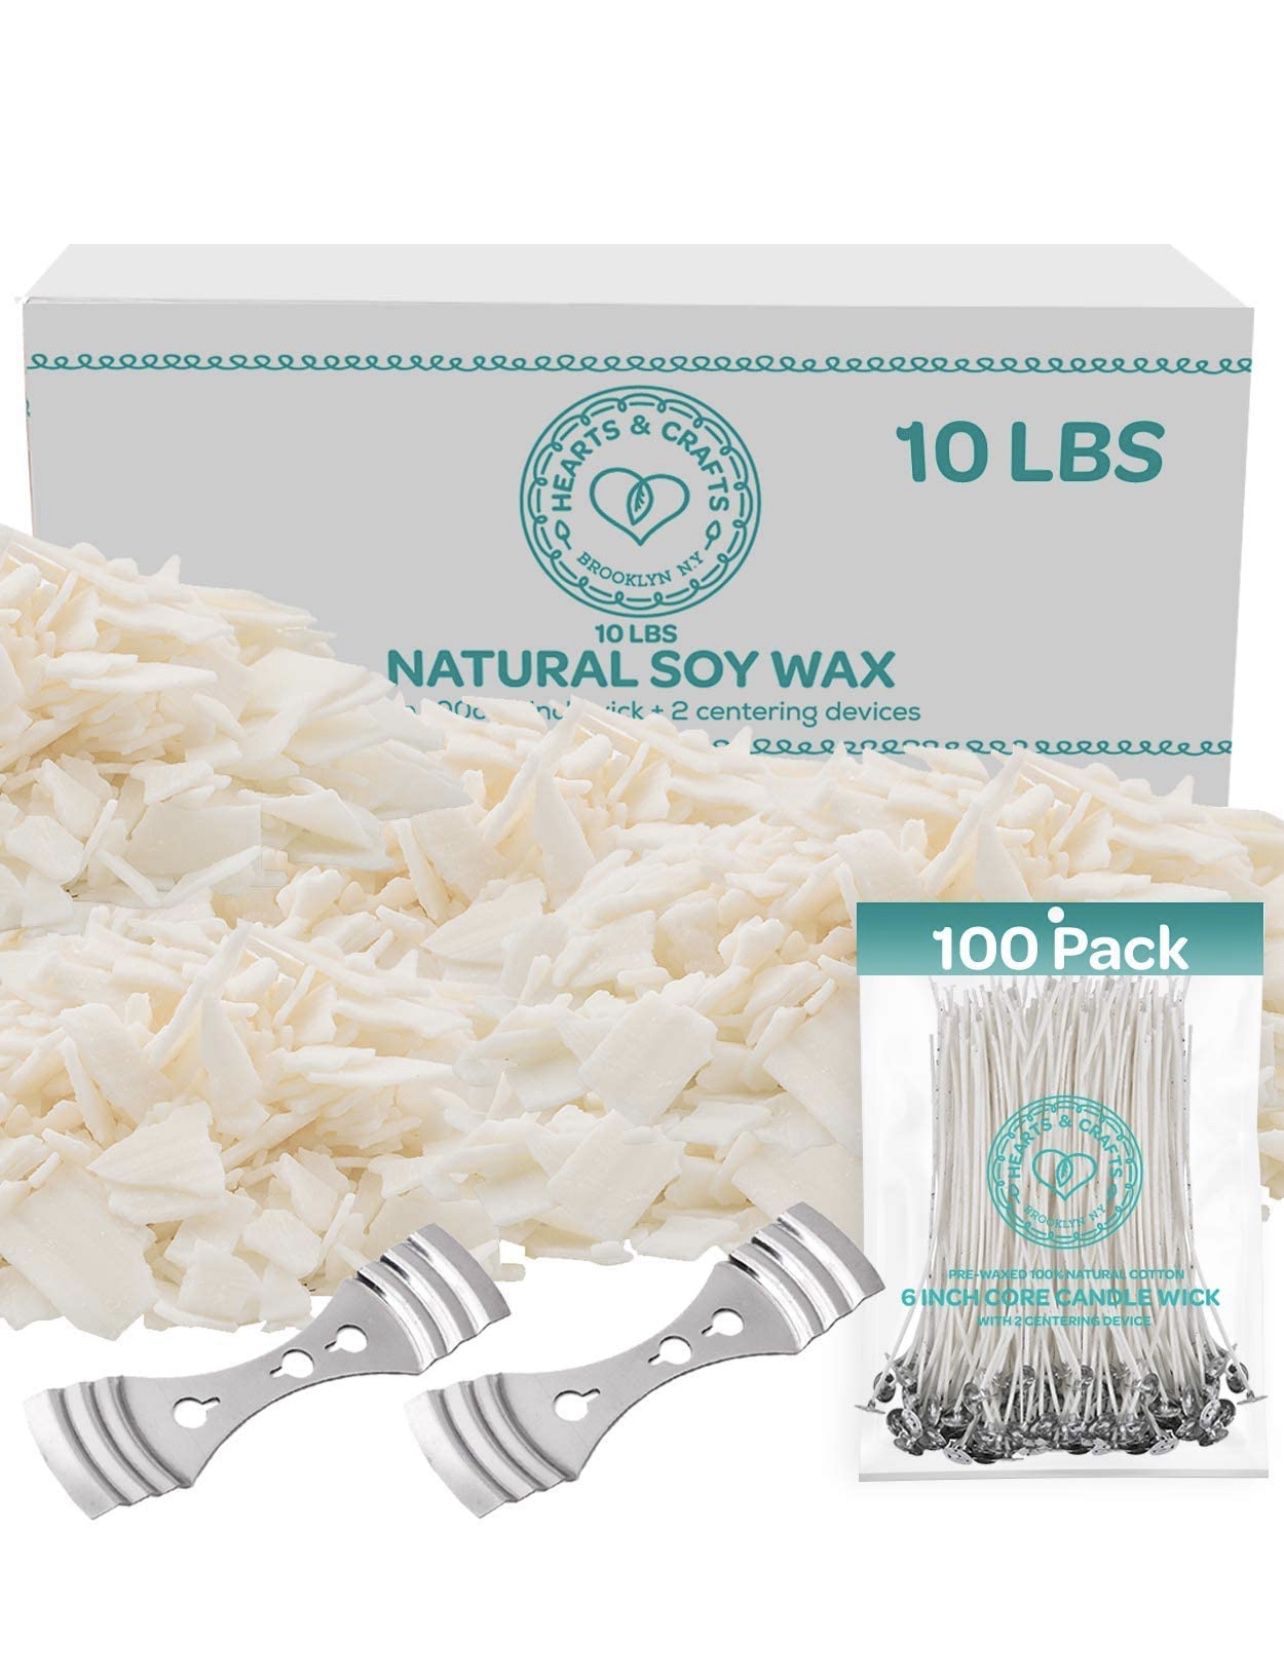 Hearts & Crafts Soy Wax and DIY Candle Making Supplies - 10lb Bag with 100 6-Inch Pre-Waxed Wicks, 2 Centering Devices